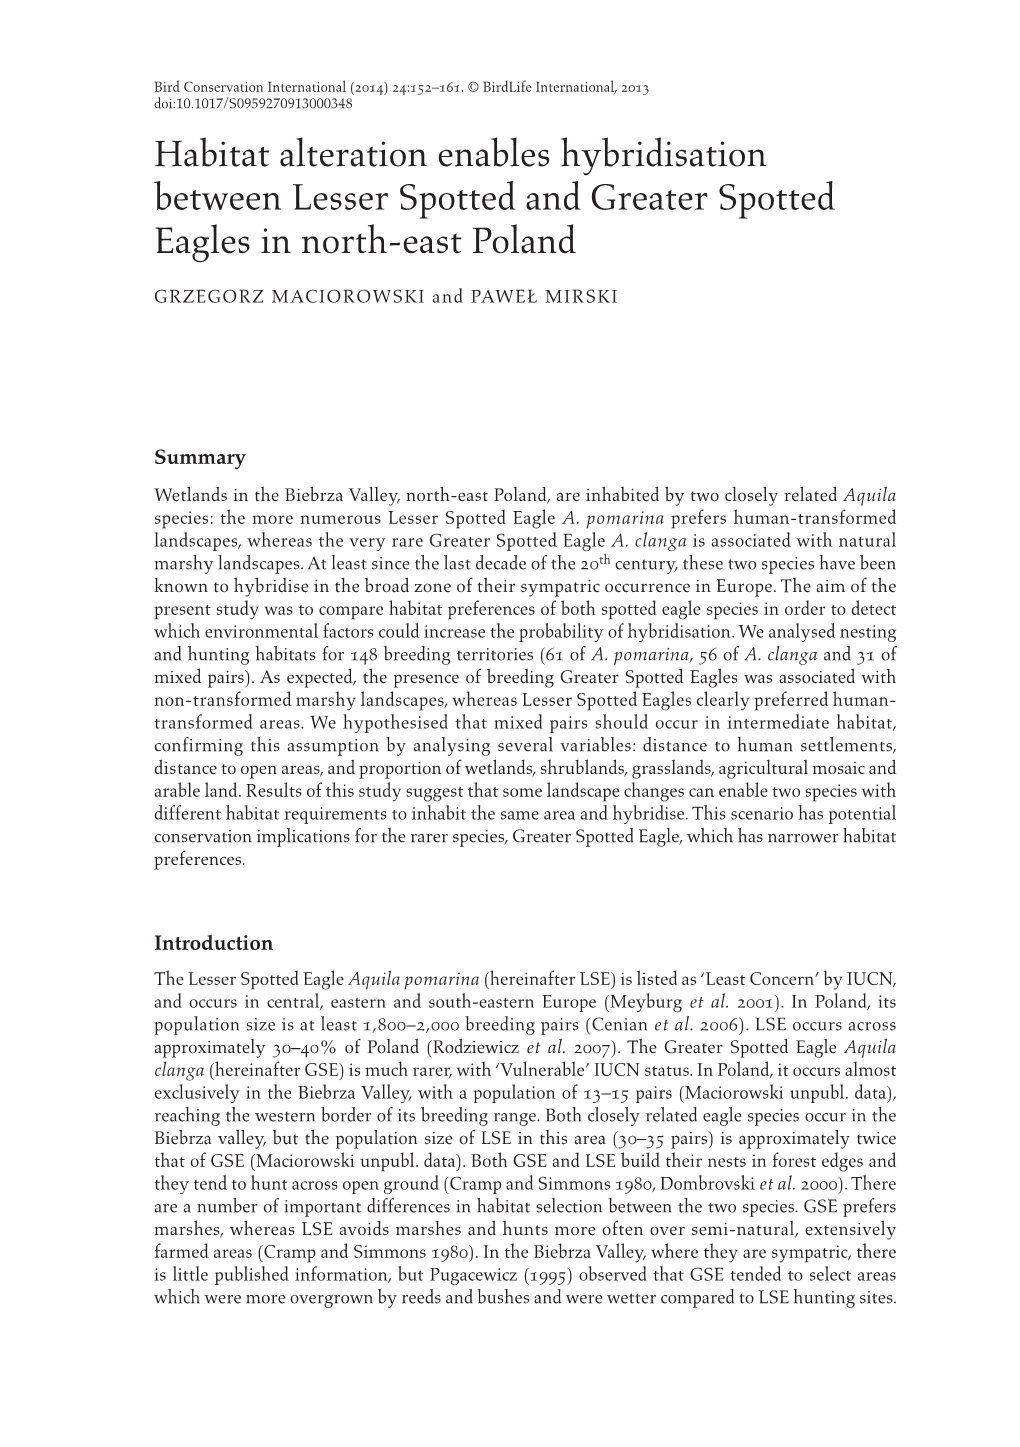 Habitat Alteration Enables Hybridisation Between Lesser Spotted and Greater Spotted Eagles in North-East Poland